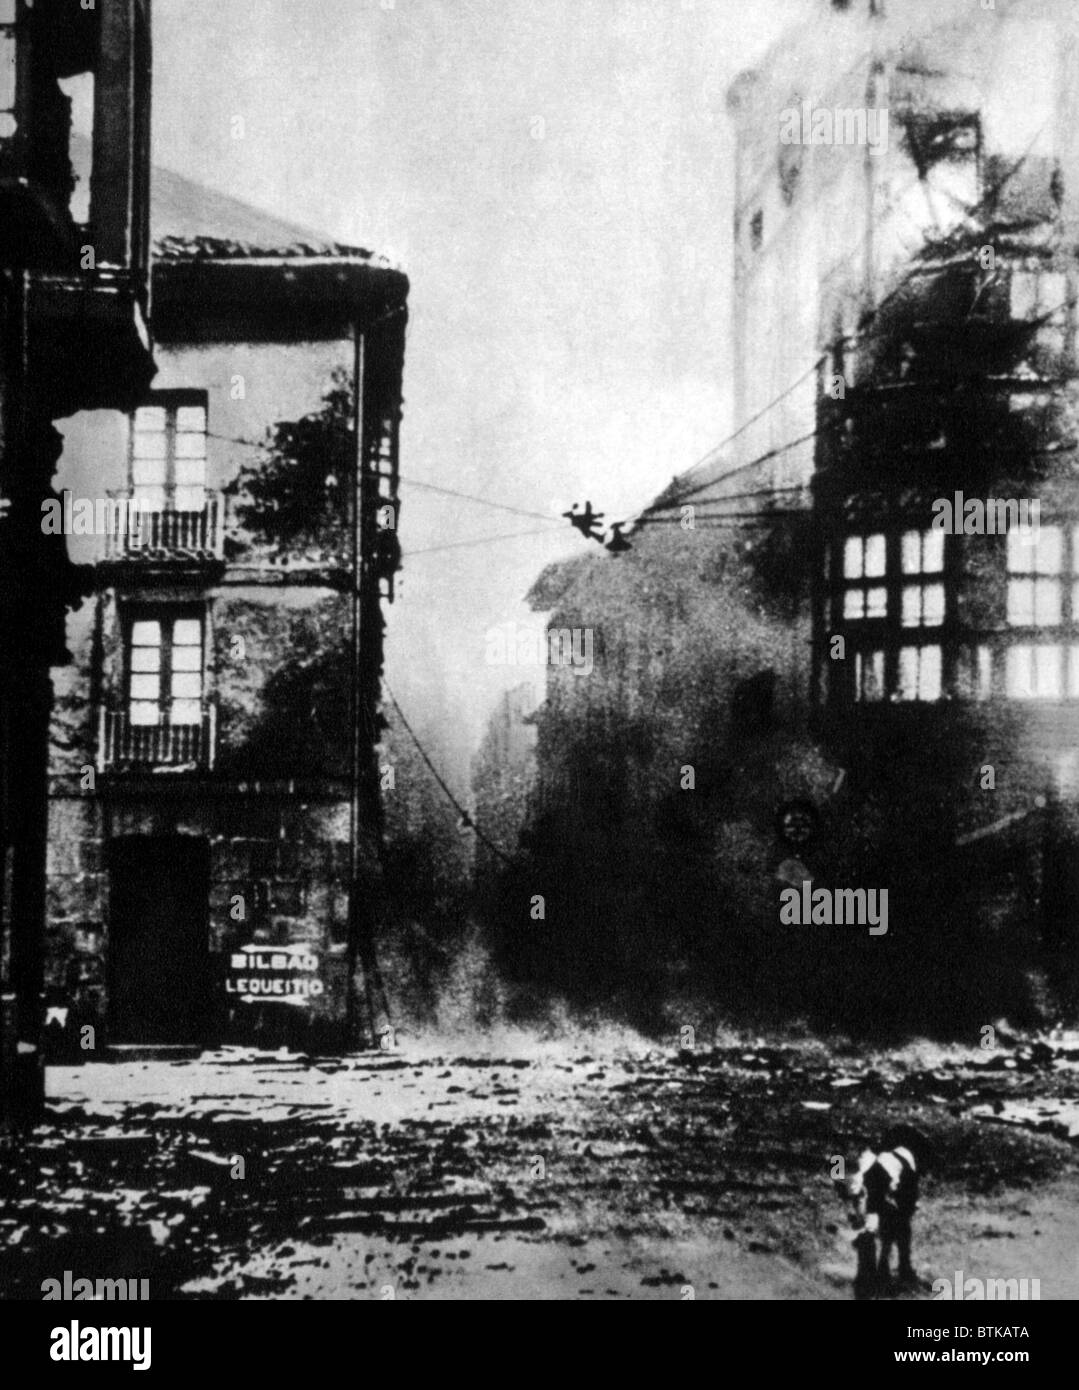 Spanish Civil War (1936-1939), the destruction of the Spanish town of Guernica by German Bombers, 1937. Stock Photo